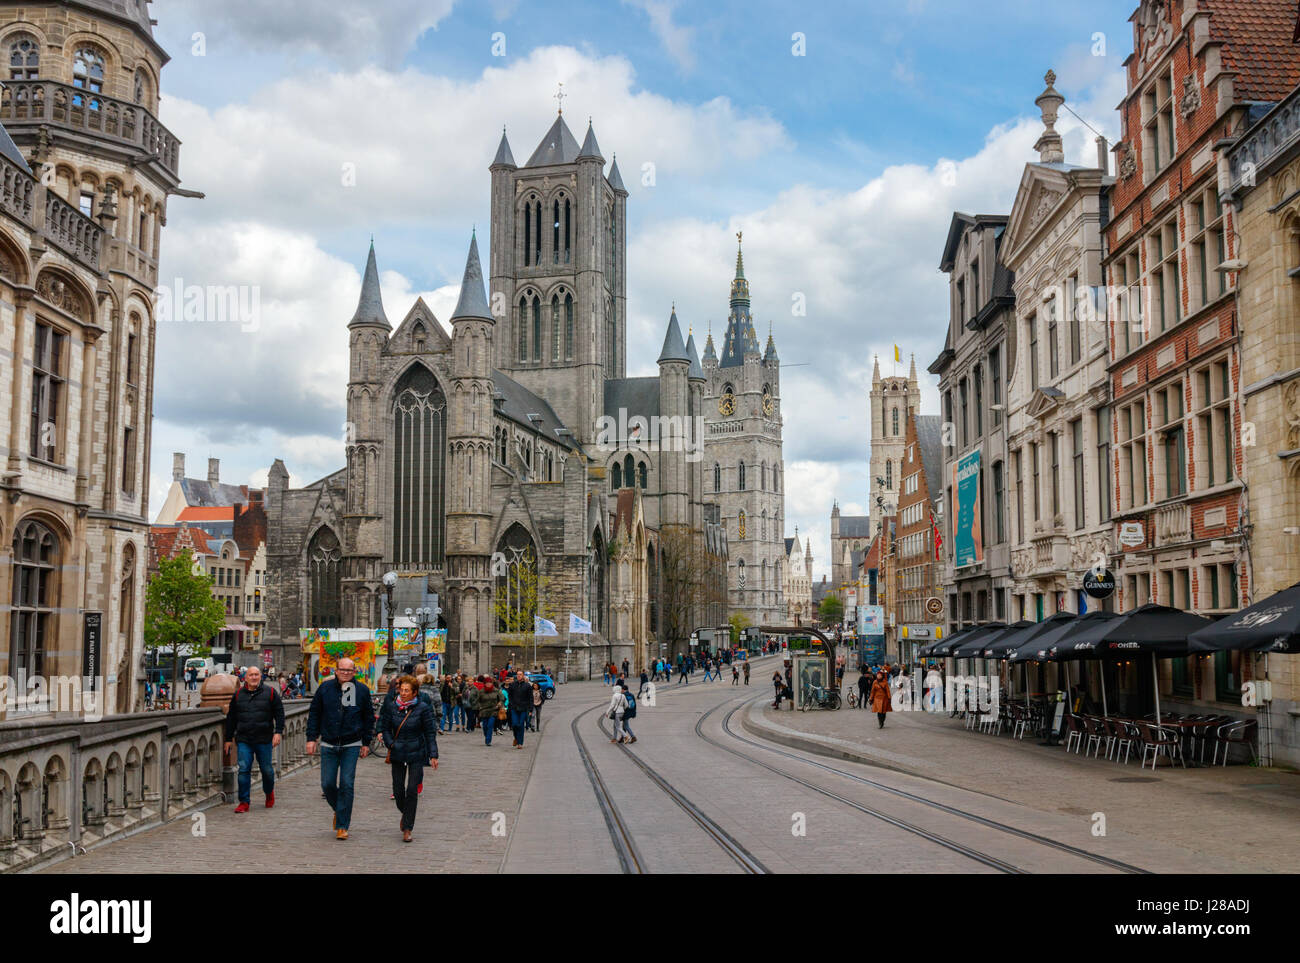 View of the old Ghent city centre with the Sint-Michielshelling, Cataloniestraat, Saint-Nicholas Church, Belfry and the Saint Bavo Cathedral. Belgium. Stock Photo